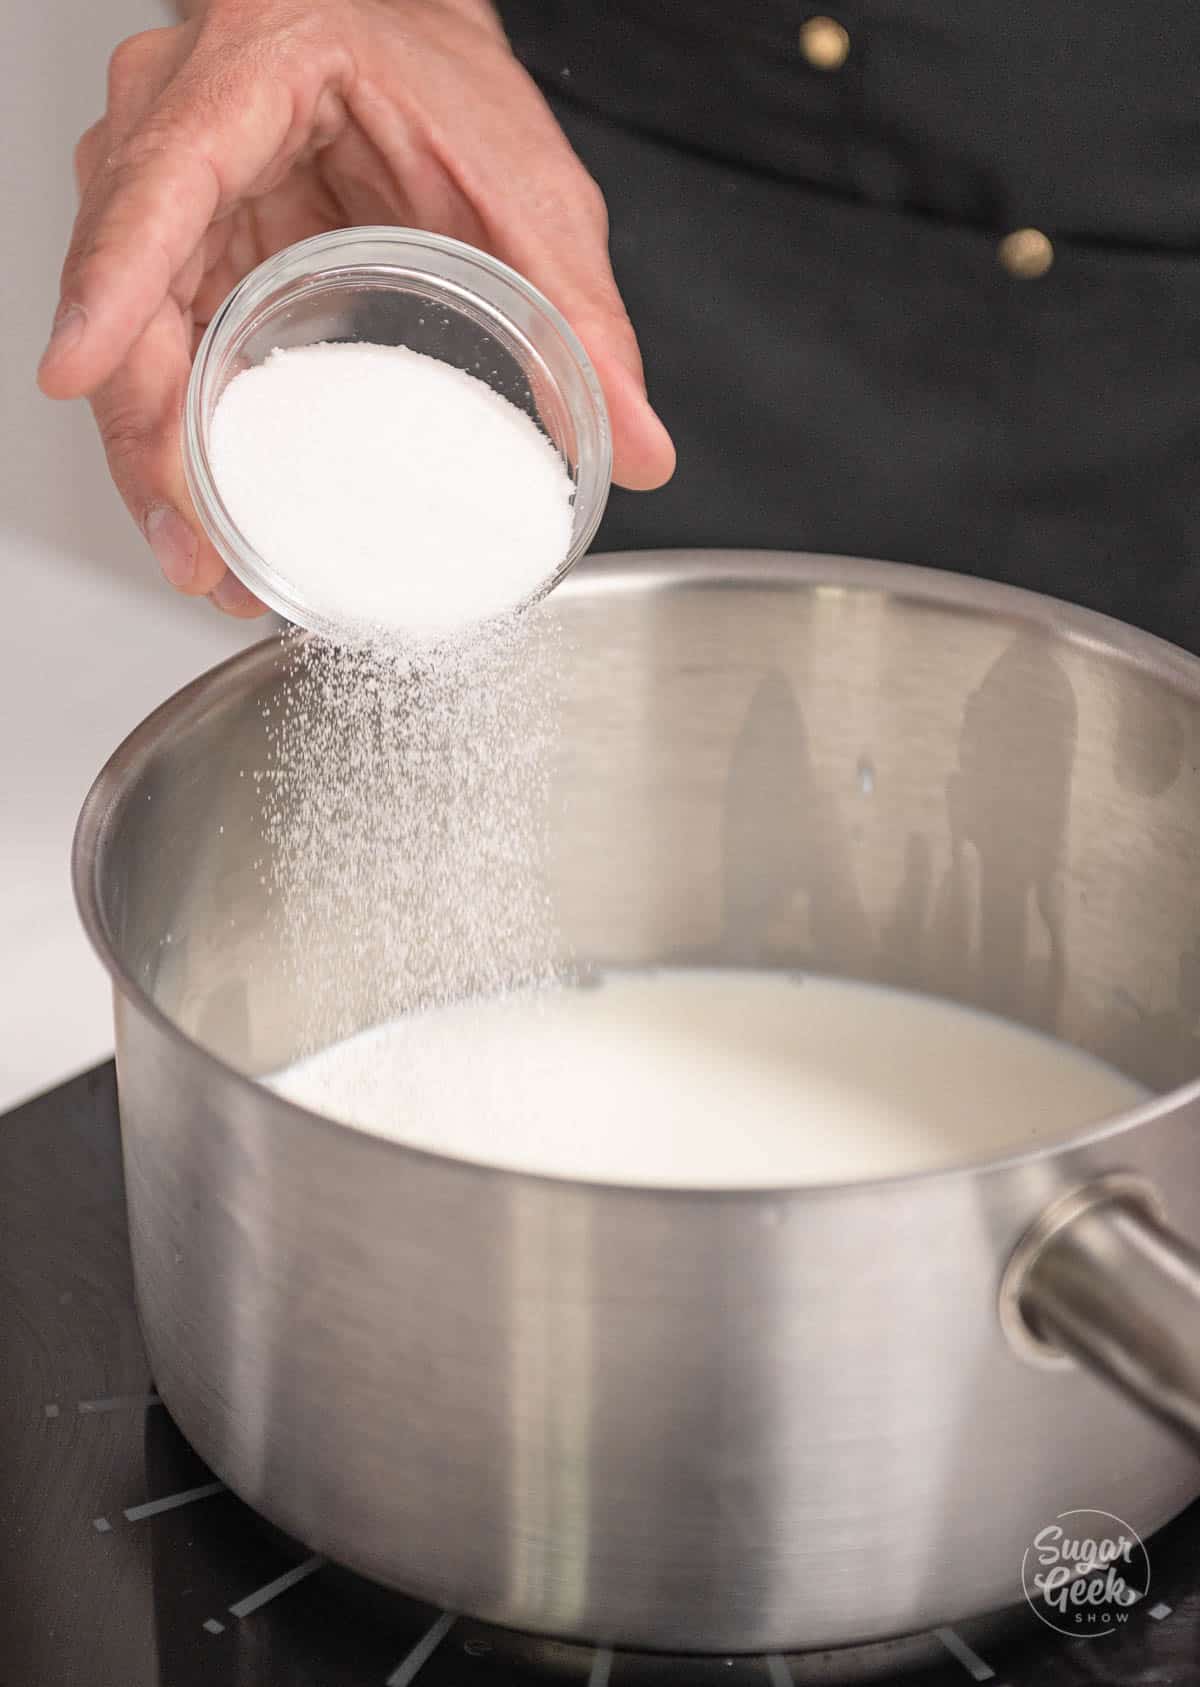 hand pouring sugar into saucepan with milk.